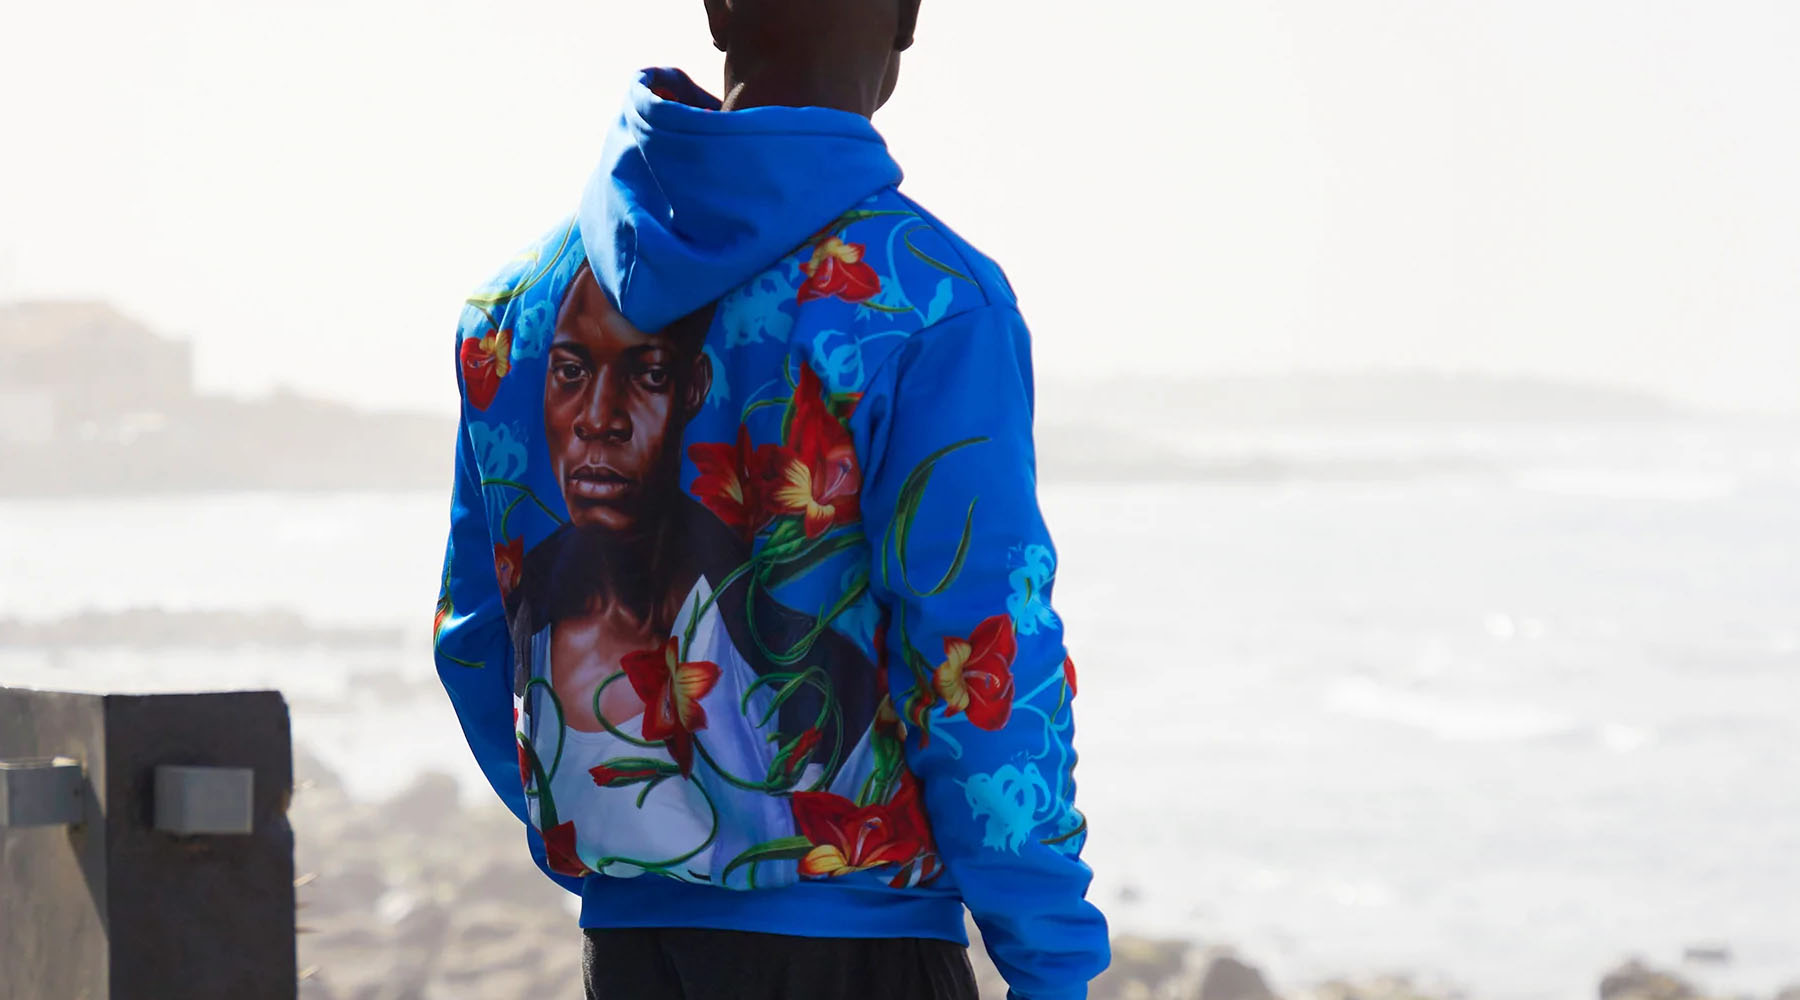 Kehinde Wiley: An Archaeology of Silence